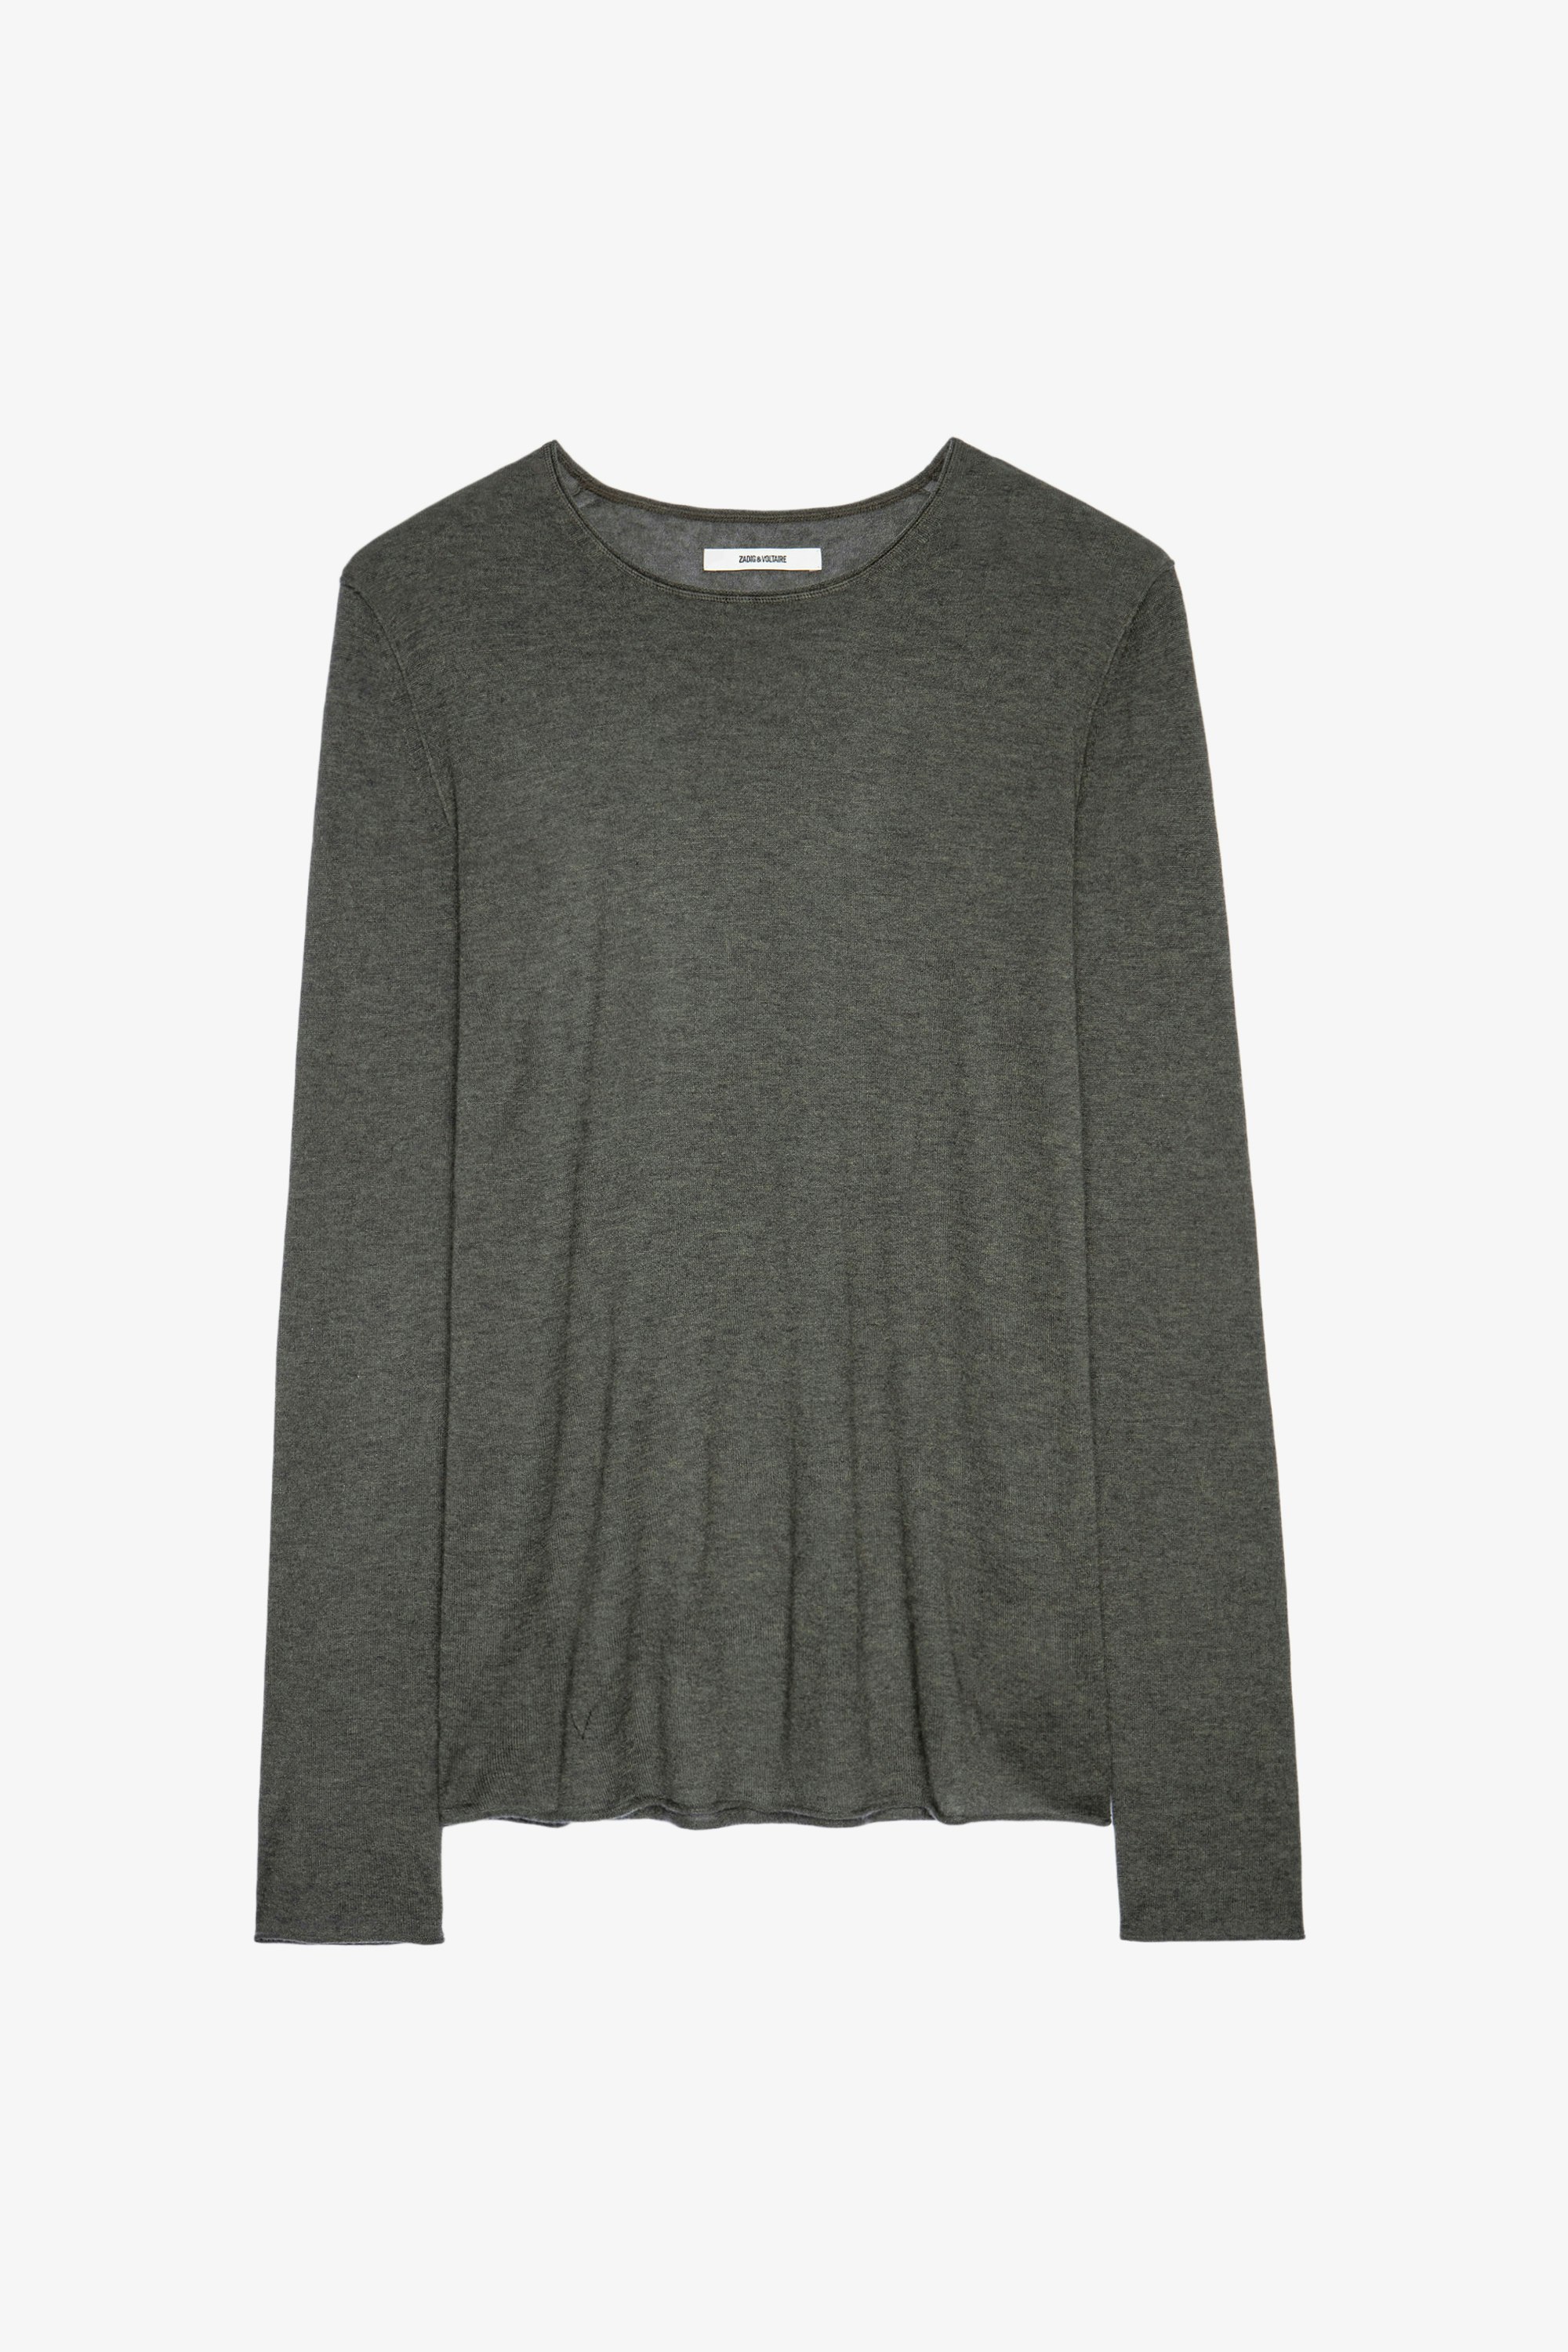 Teiss Cachemire Jumper - Men’s sweater in featherweight cashmere.